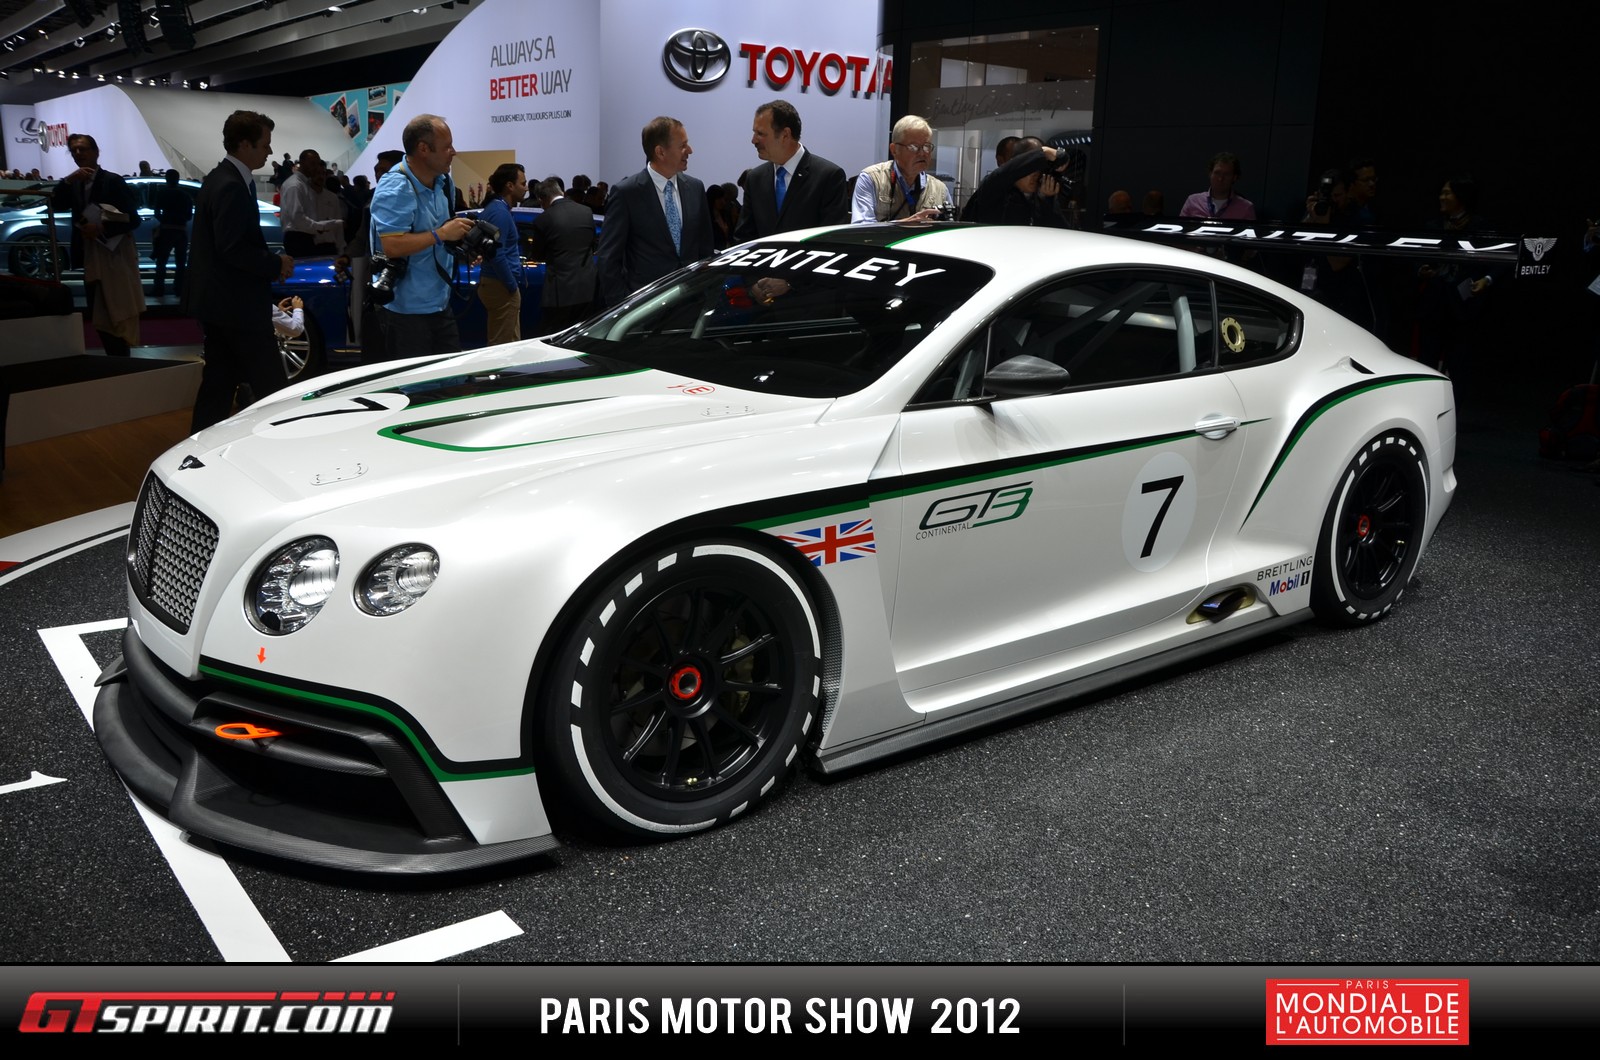 The Future Of Luxury: The 2012 Bentley Continental GT3 Concept